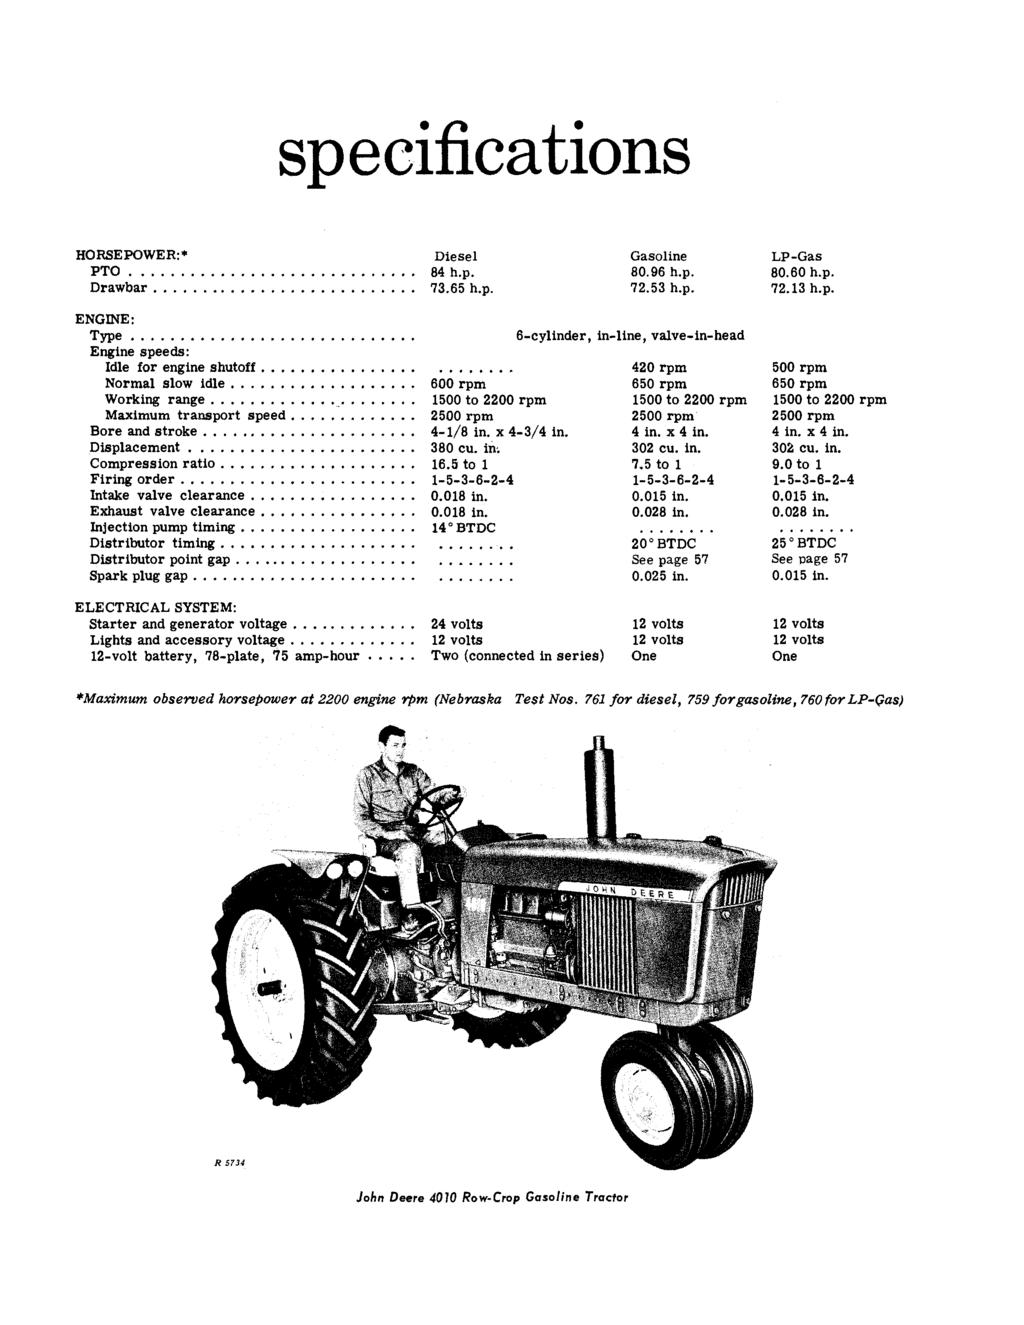 specifications HORSEPOWER: Diesel PTO.... 4 h.p. Drawbar.. 73.65 h.p. Gasoline 0.96 h.p. 72.53 h.p. LP-Gas 0.60 h.p. 72.13 h.p. ENGINE: Type..... Engine speeds: Idle for engine shutoff Normal slow idle.